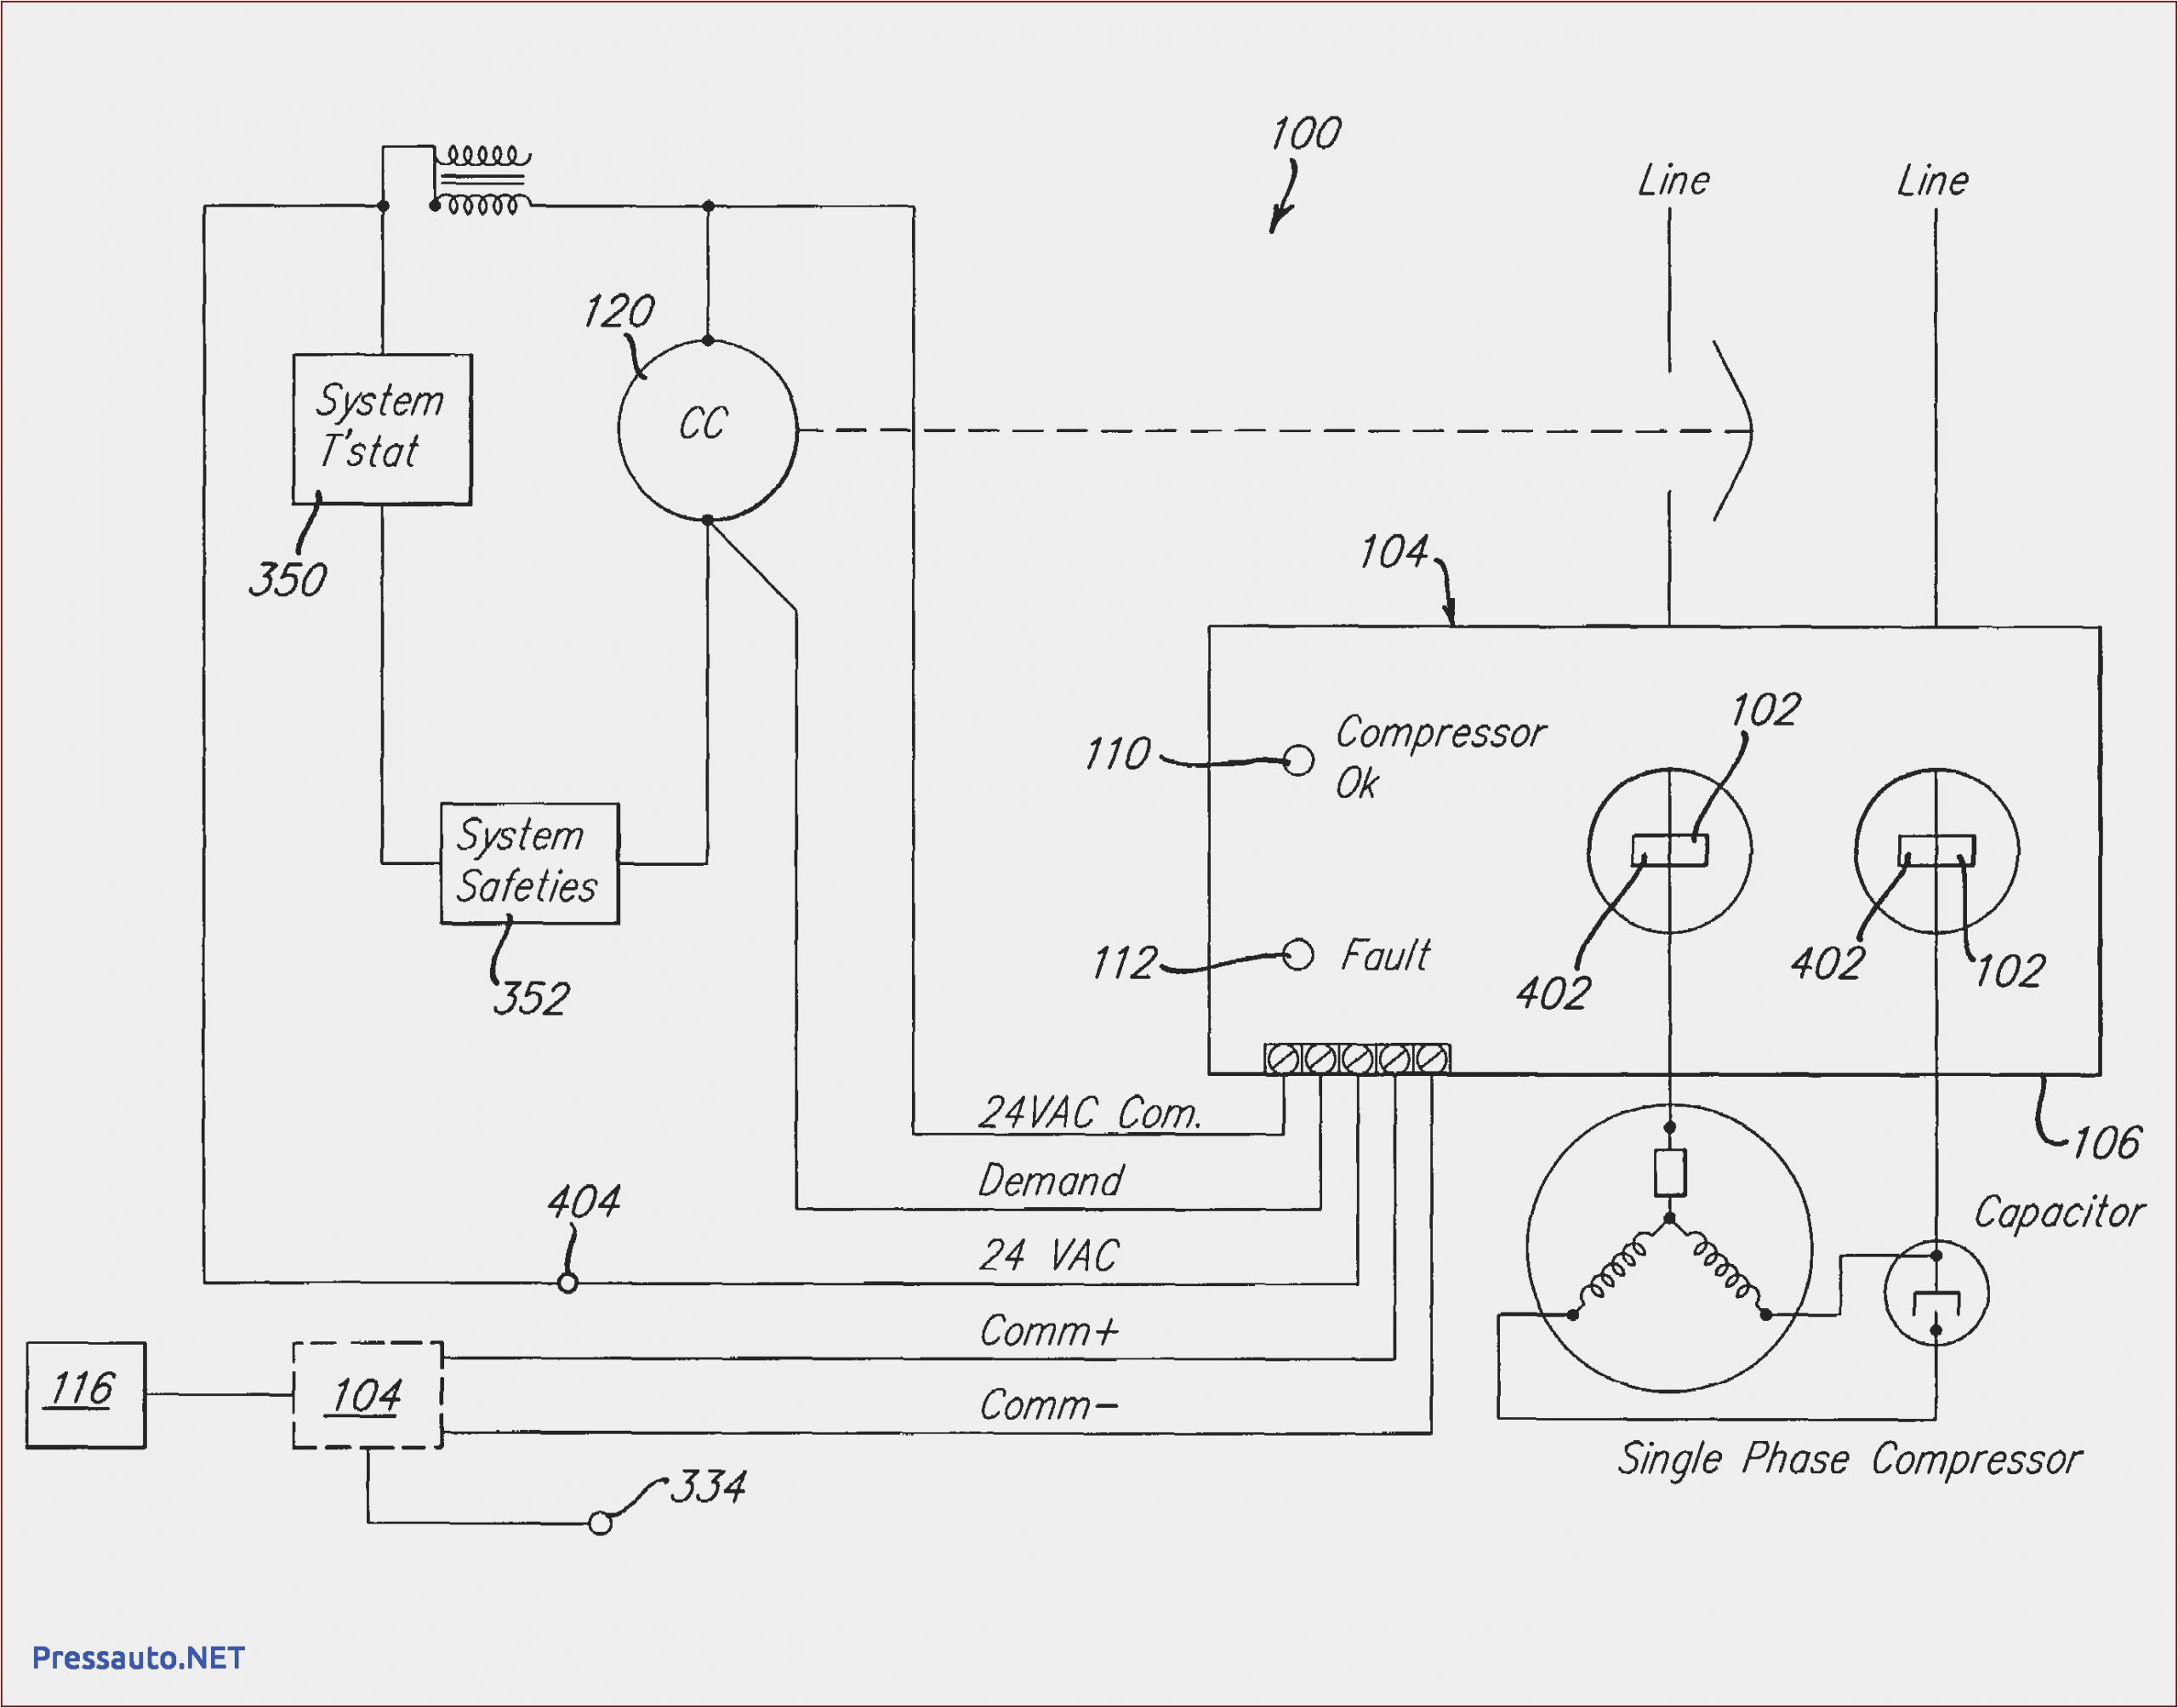 compressor wiring diagram with start capacitor of compressor wiring diagram with start capacitor jpg